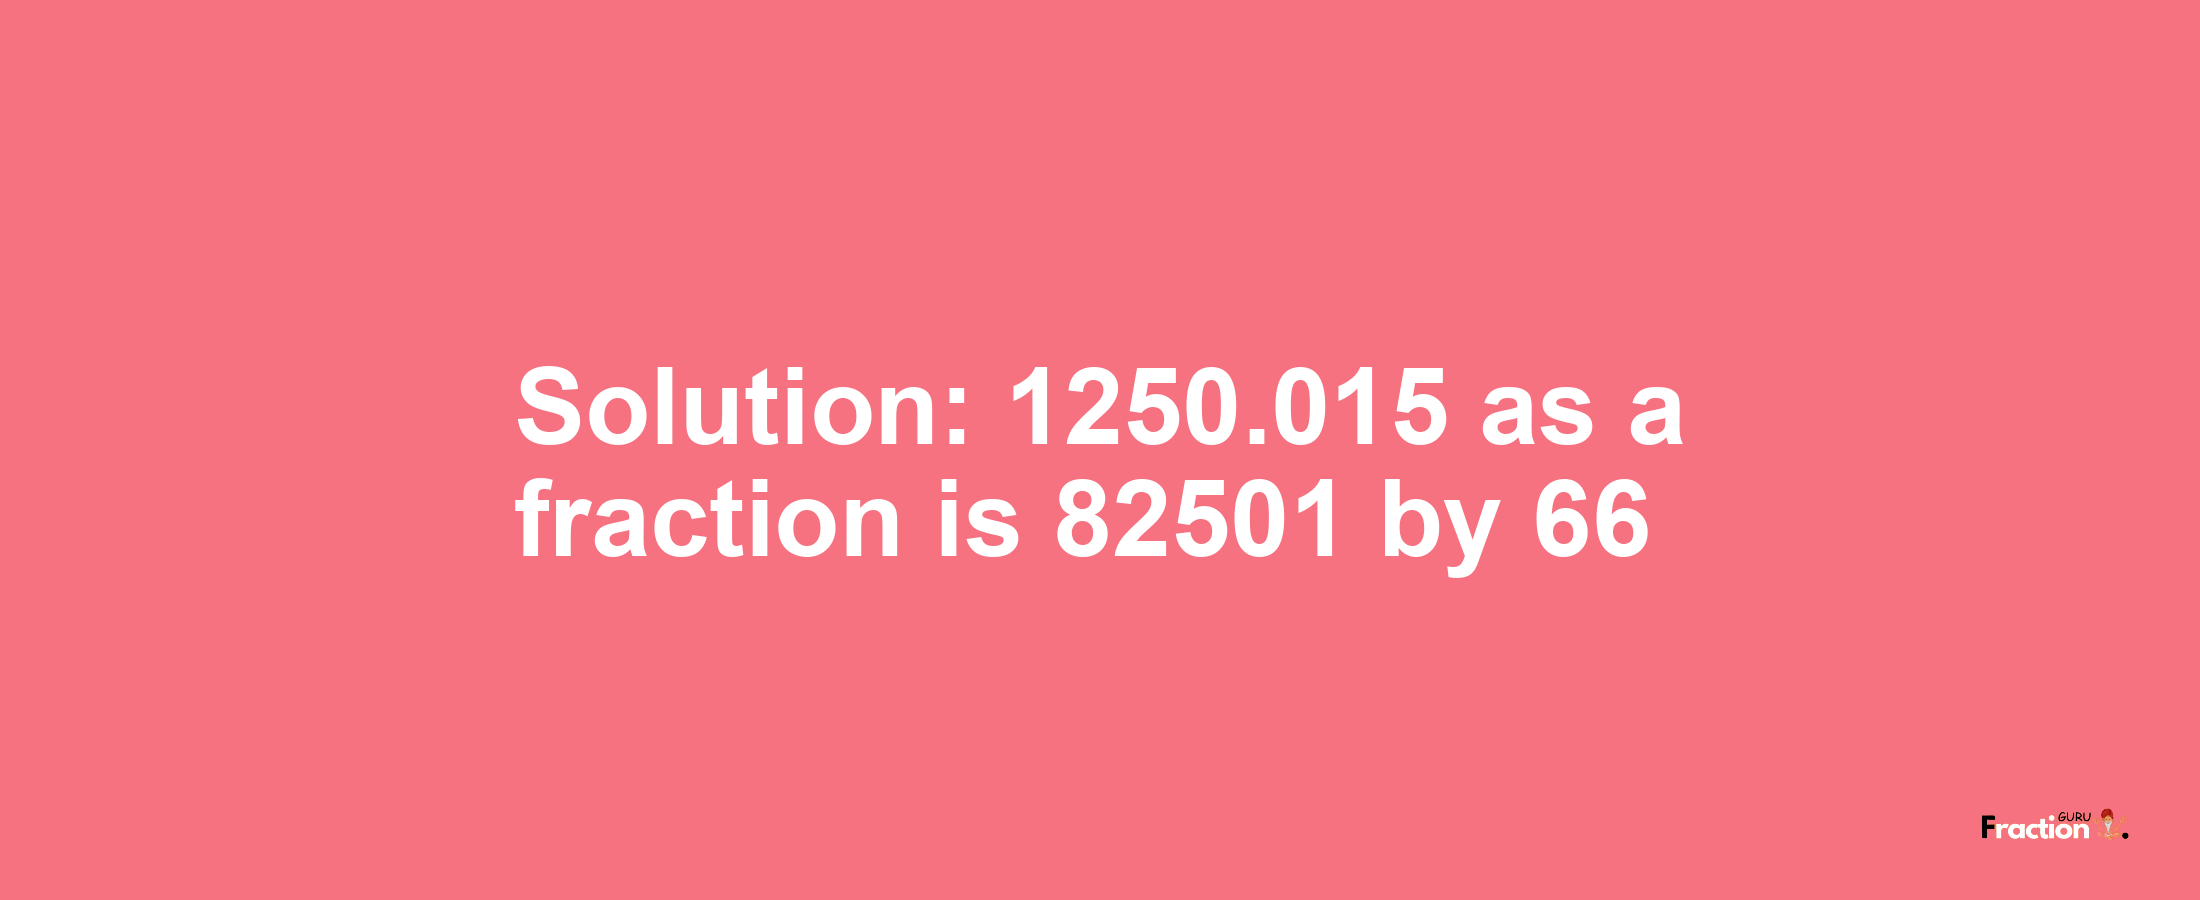 Solution:1250.015 as a fraction is 82501/66